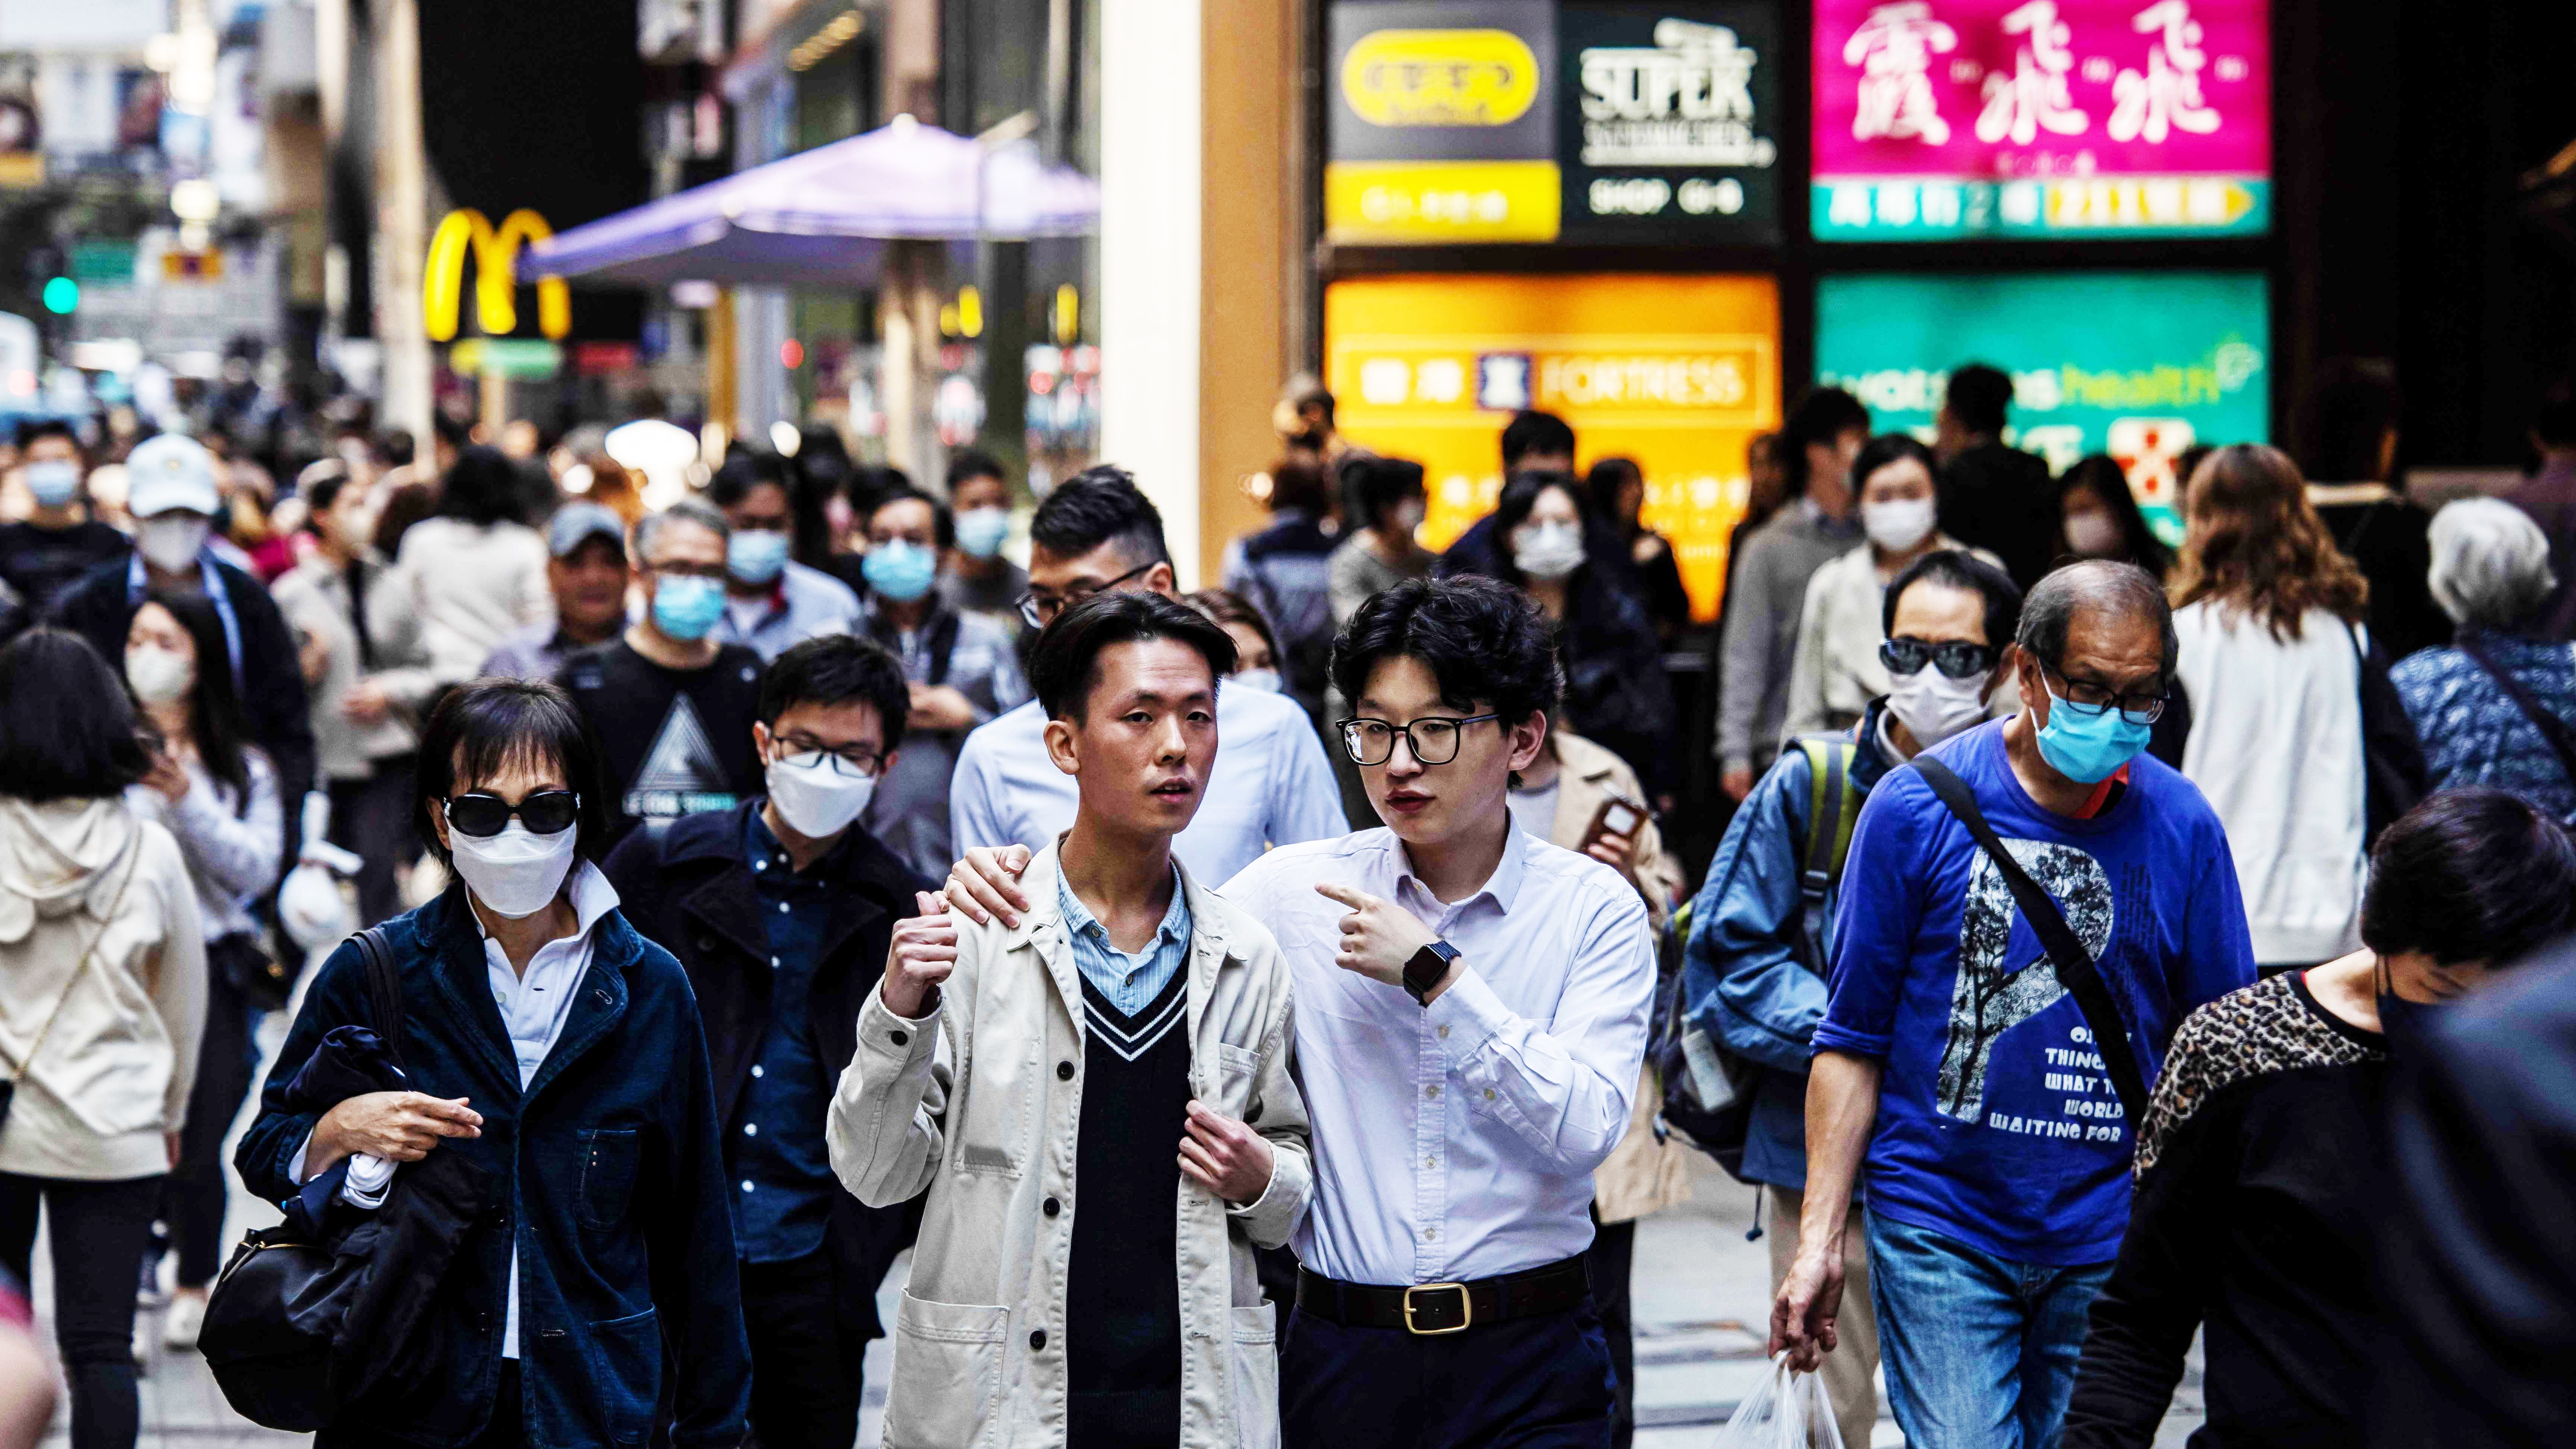 Bevidst inerti deltager An addiction': masks come off slowly in Hong Kong as habit outlasts Covid |  Financial Times